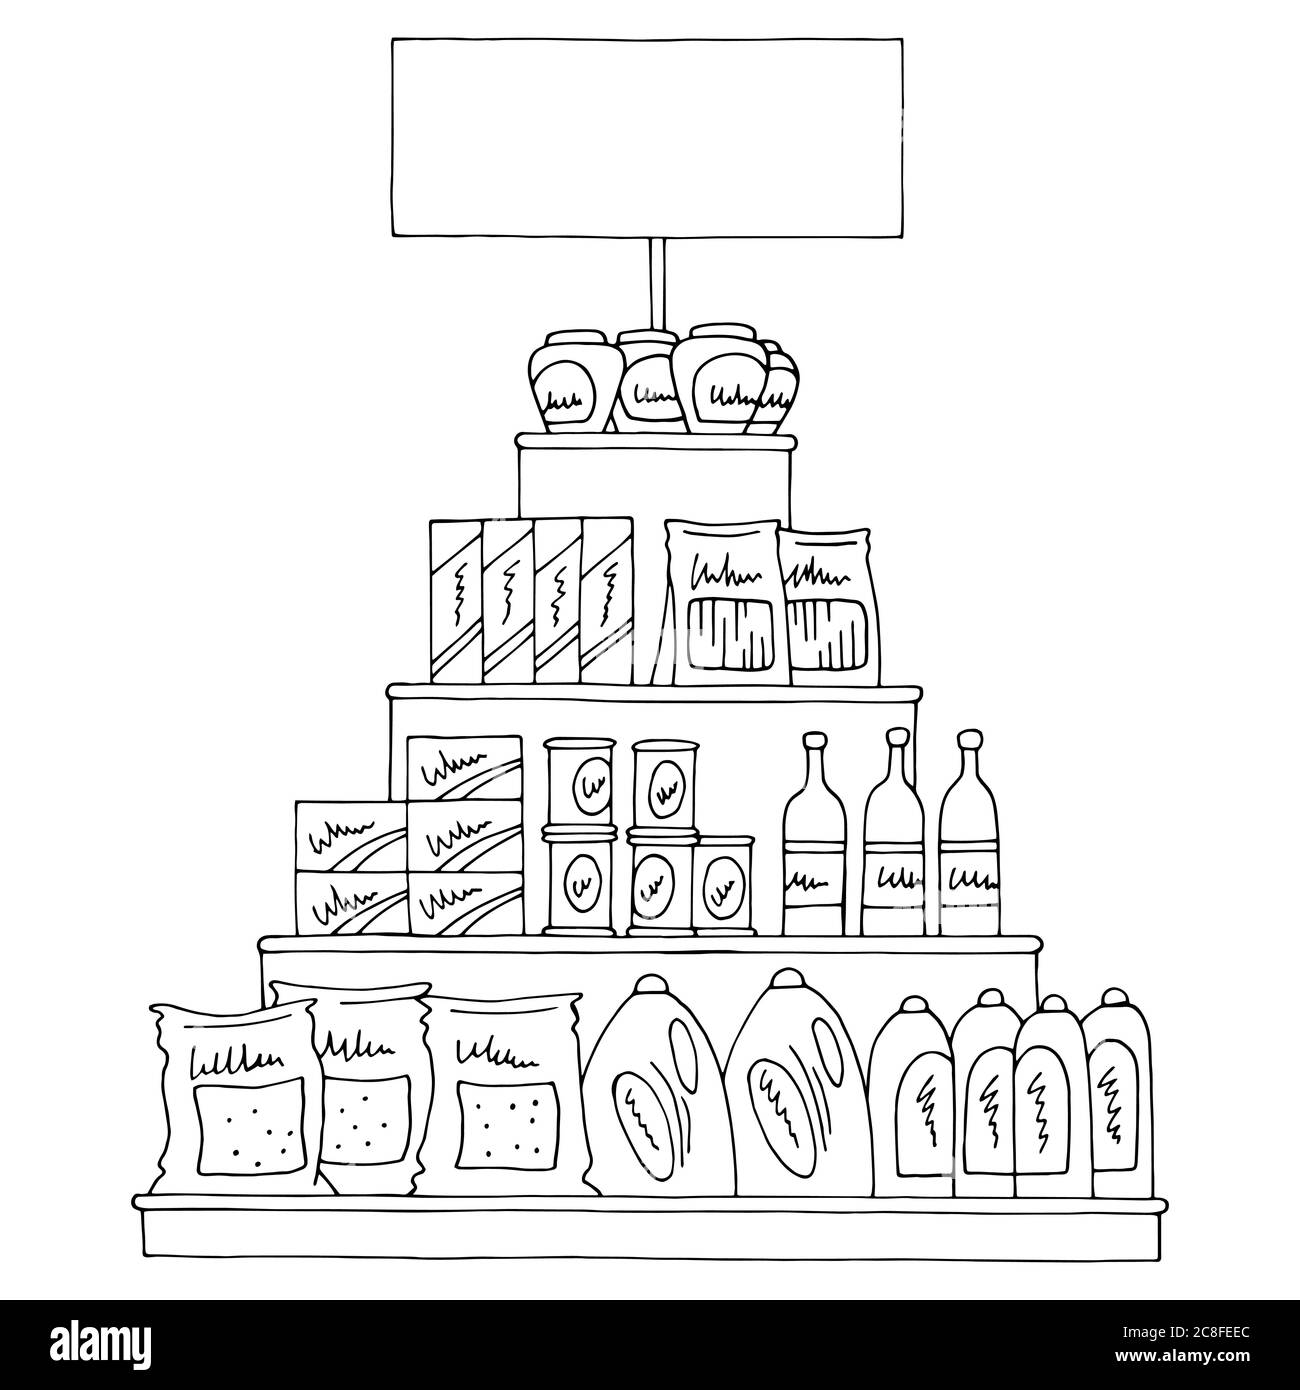 Grocery pyramid shelves graphic black white isolated sketch food store illustration vector Stock Vector